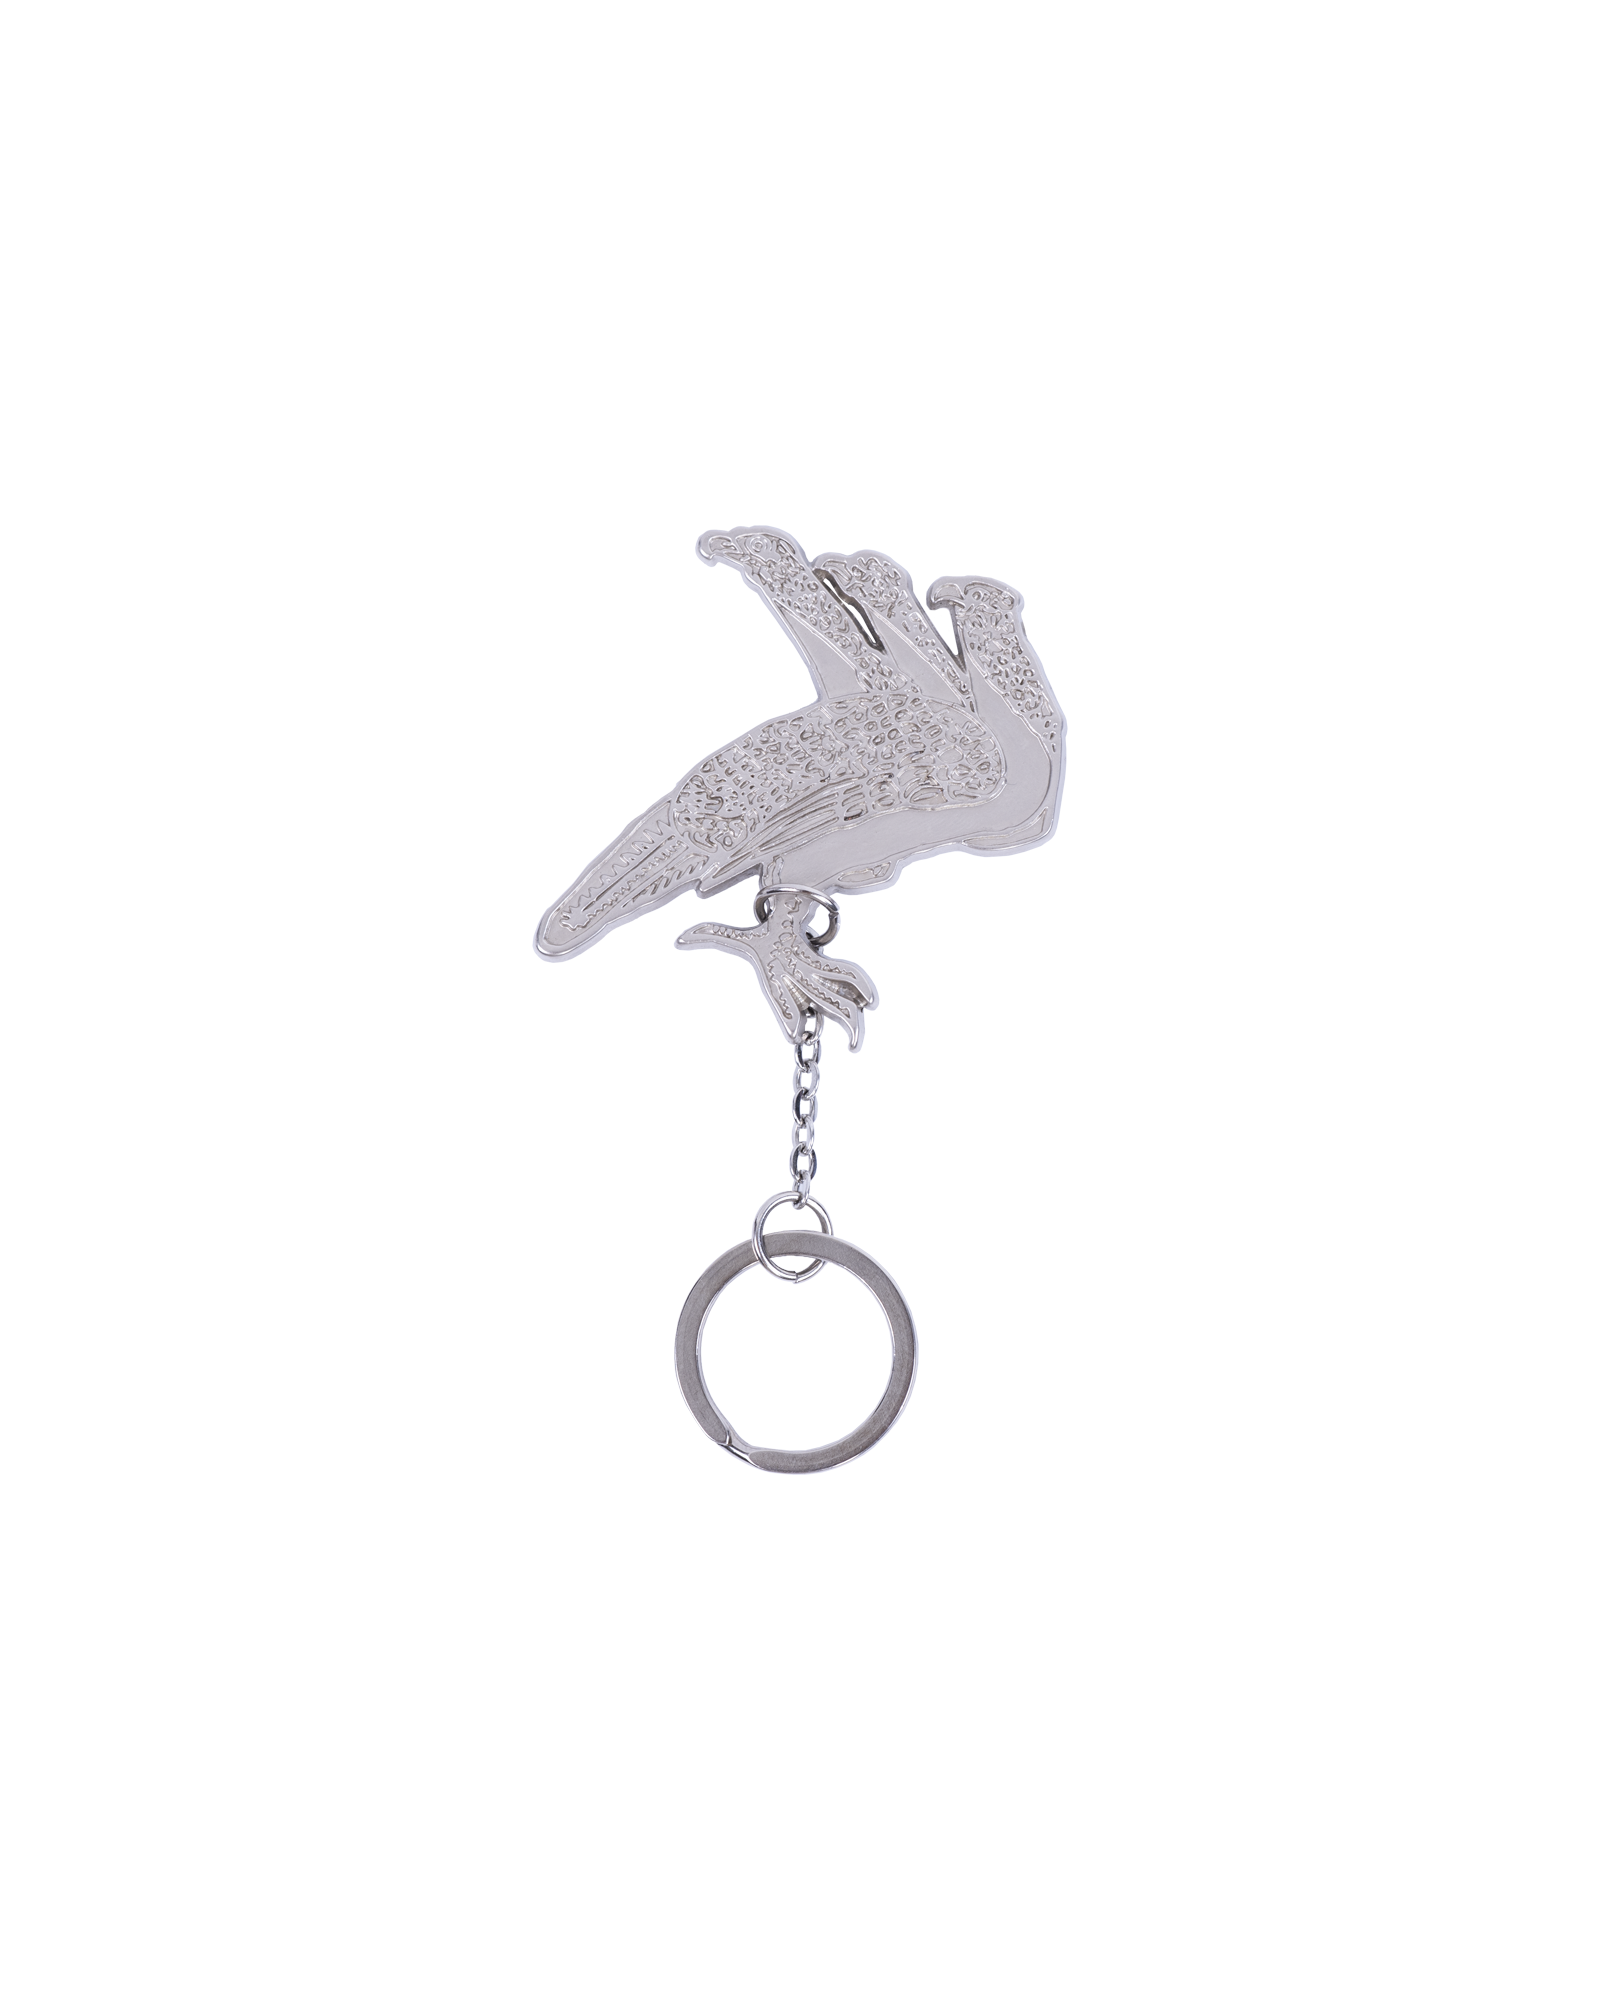 THE LUCKY CHARM KEYRING